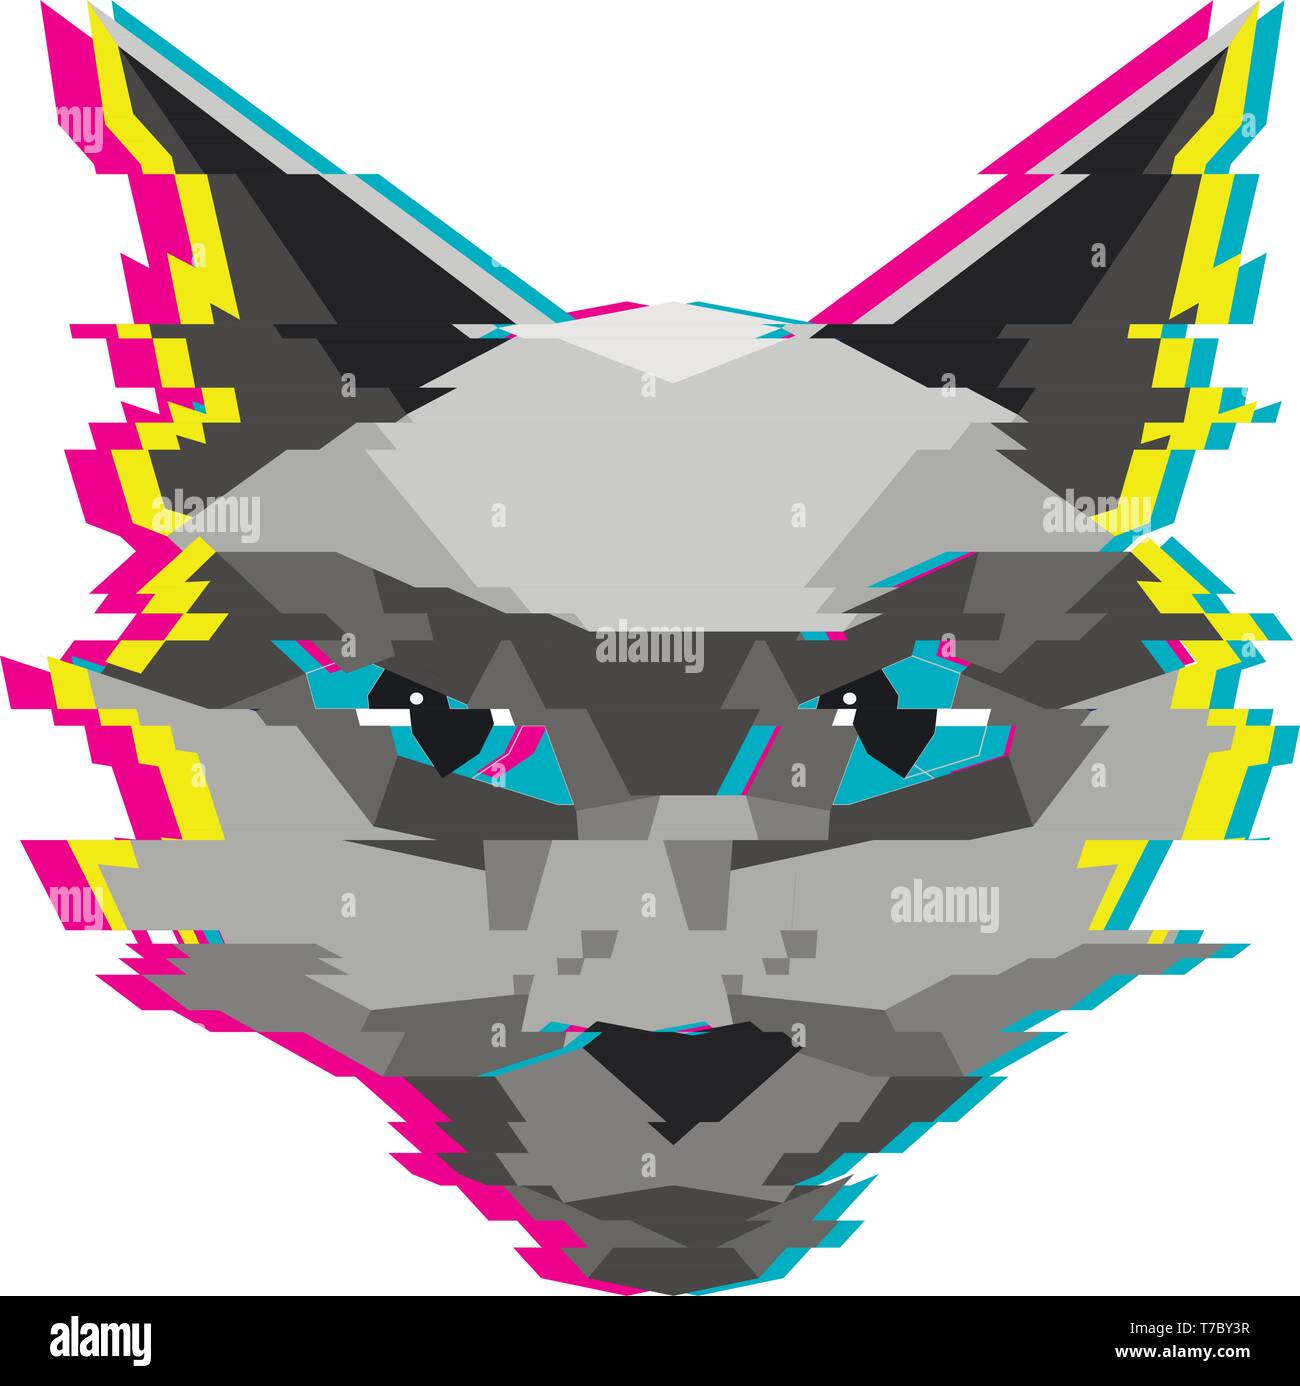 Creative low poly cat illustration with glitch effect. Stock Vector